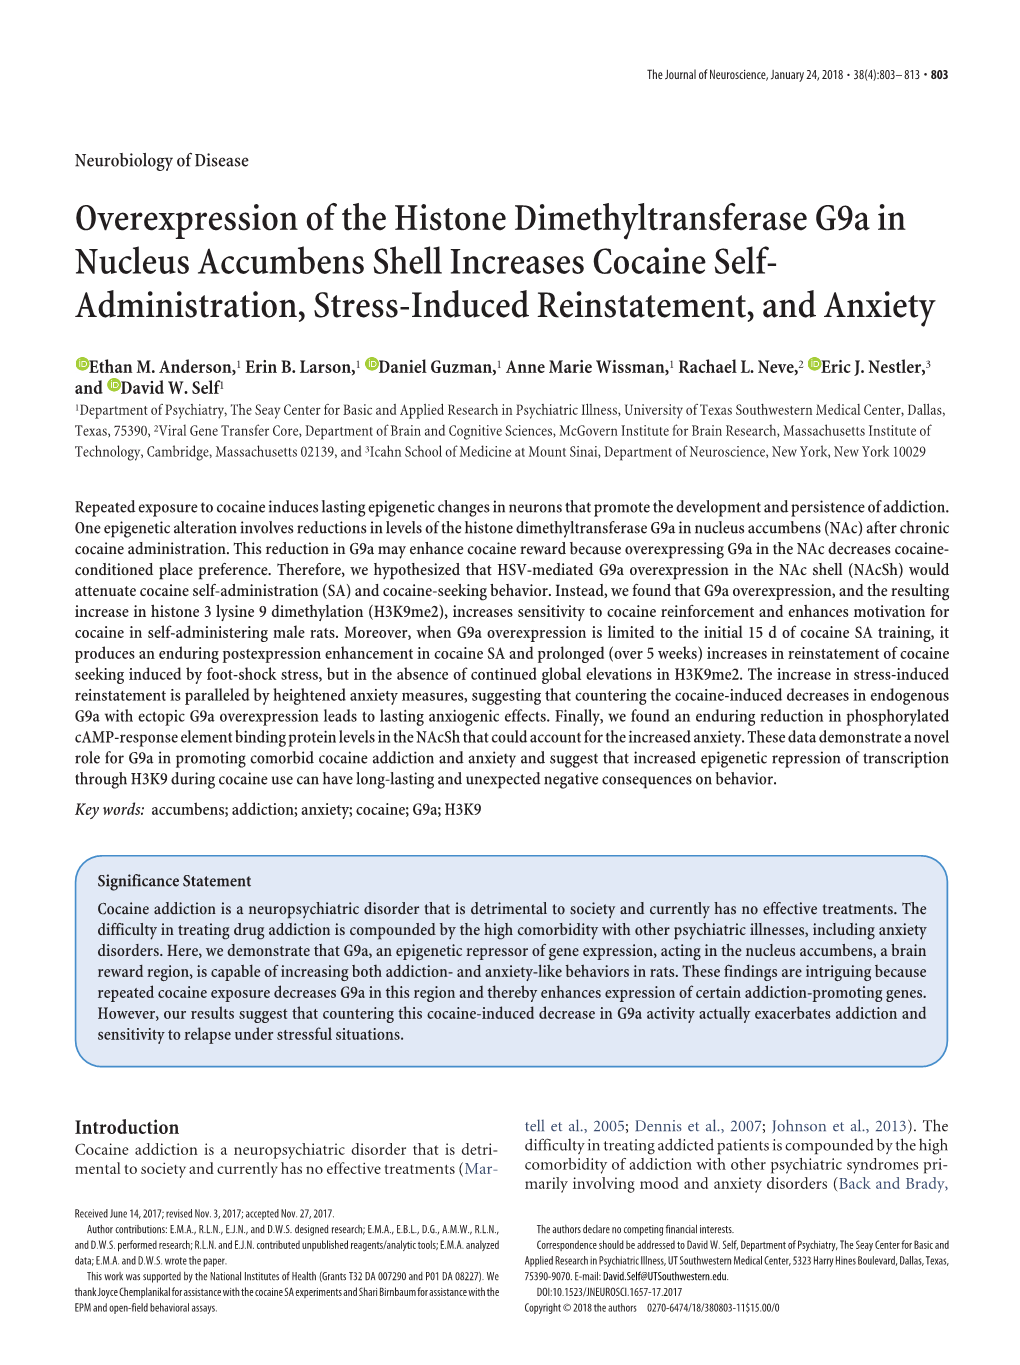 Overexpression of the Histone Dimethyltransferase G9a in Nucleus Accumbens Shell Increases Cocaine Self- Administration, Stress-Induced Reinstatement, and Anxiety